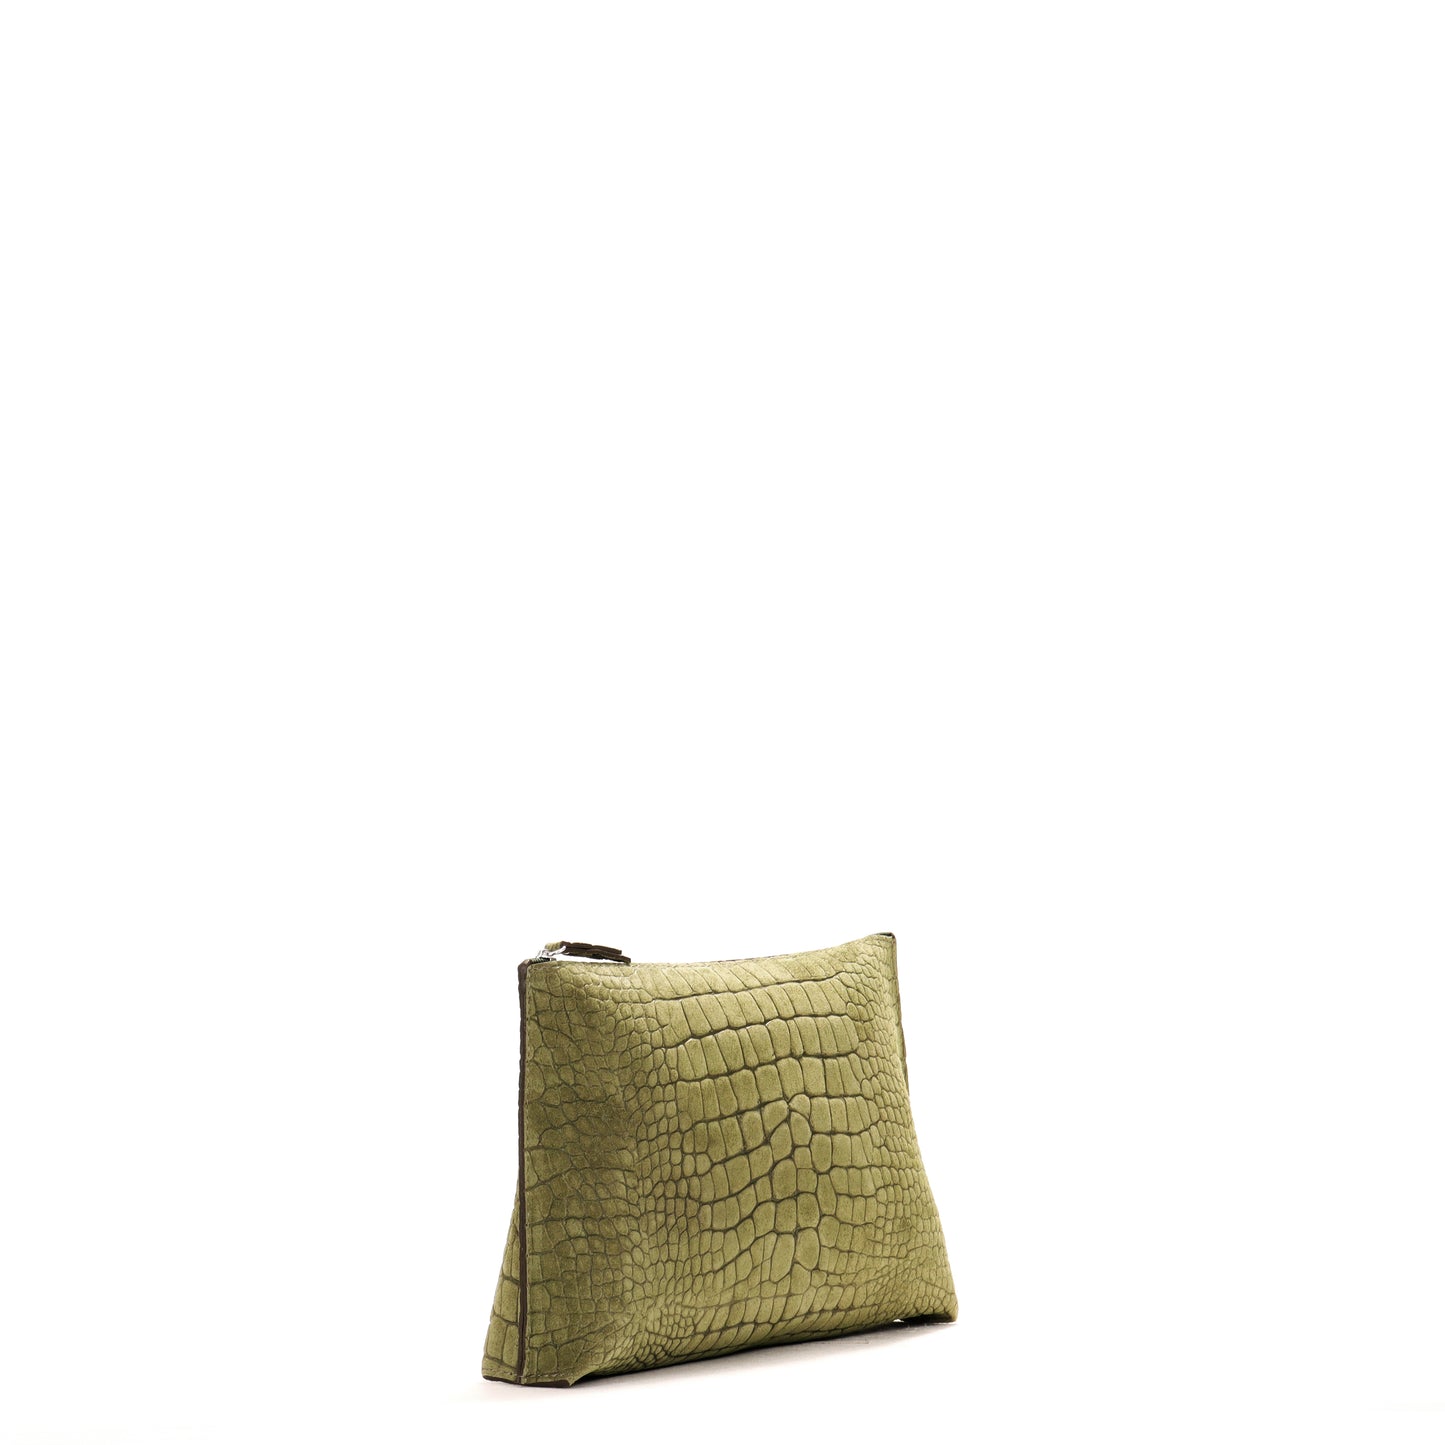 EVERYDAY POUCH FIG SUEDED EMBOSSED CROC